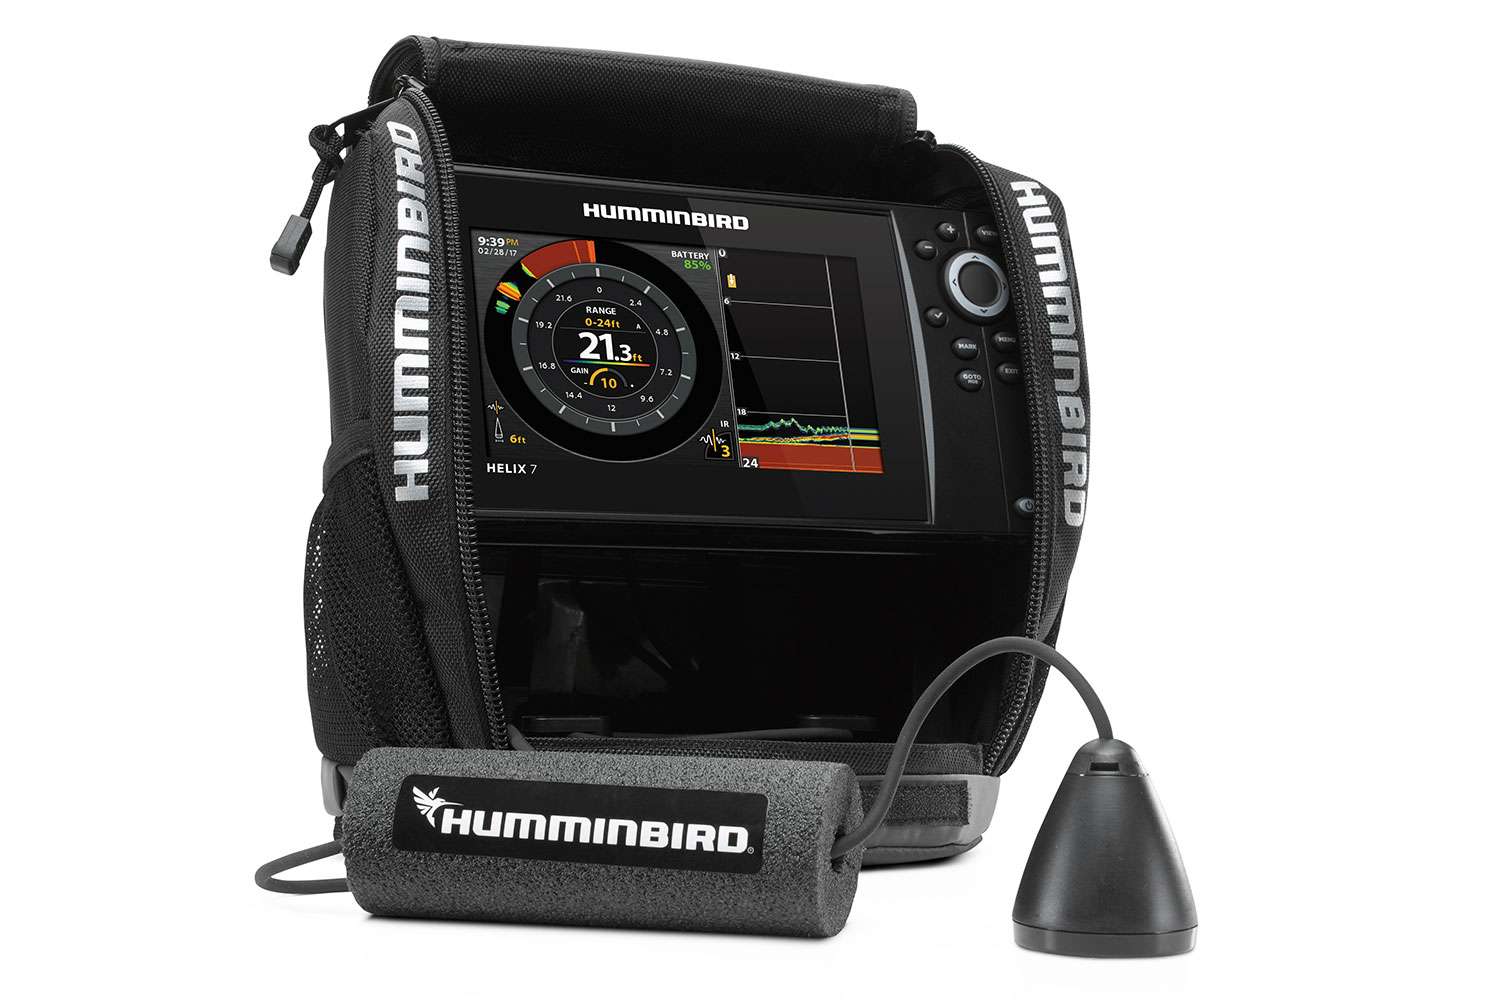 <p><b>Humminbird Ice Helix 7 CHIRP G2, $649.99-$729.99</b></p> The Humminbird Ice Helix Series has been a go-to choice for anglers looking to have an all-in-one ice unit with built-in GPS capability. Now, with the new Ice Helix 7 CHIRP GPS G2N, anglers have access to leading fish finding and mapping technology year-round in one unit. The new fish finder is networkable with other Helix G2N models and features GPS, CHIRP Digital Sonar, Humminbird Basemap and AutoChart Live.</p>  <p>Unlike traditional sonar, which operates at a single, constant frequency, CHIRP optimizes pulsing sonar signals for greater target separation. CHIRP provides more detail and clarity â ice anglers can now confidently see the separation between bottom, bait and fish on the screen, instead of all three blending into one color on their locator or flasher. This is critical in ice fishing when most species of fish are hugging the bottom, and being able to discern your lure from the lake bottom can be the difference between going home empty-handed or with a limit.</p>   <p>The new Ice Helix 7 CHIRP GPS G2N also features Humminbirdâs easy-to-use Interference Rejection feature. Fishing with sonar on a busy lake can mean unwanted interference from multiple sonar signals in the water, which causes screens to be difficult to read. The Interference Rejection mode gives anglers confidence by letting them find the right sonar setting to cancel out competing signals, resulting in a screen that is almost completely void of noise. <br> <a href=